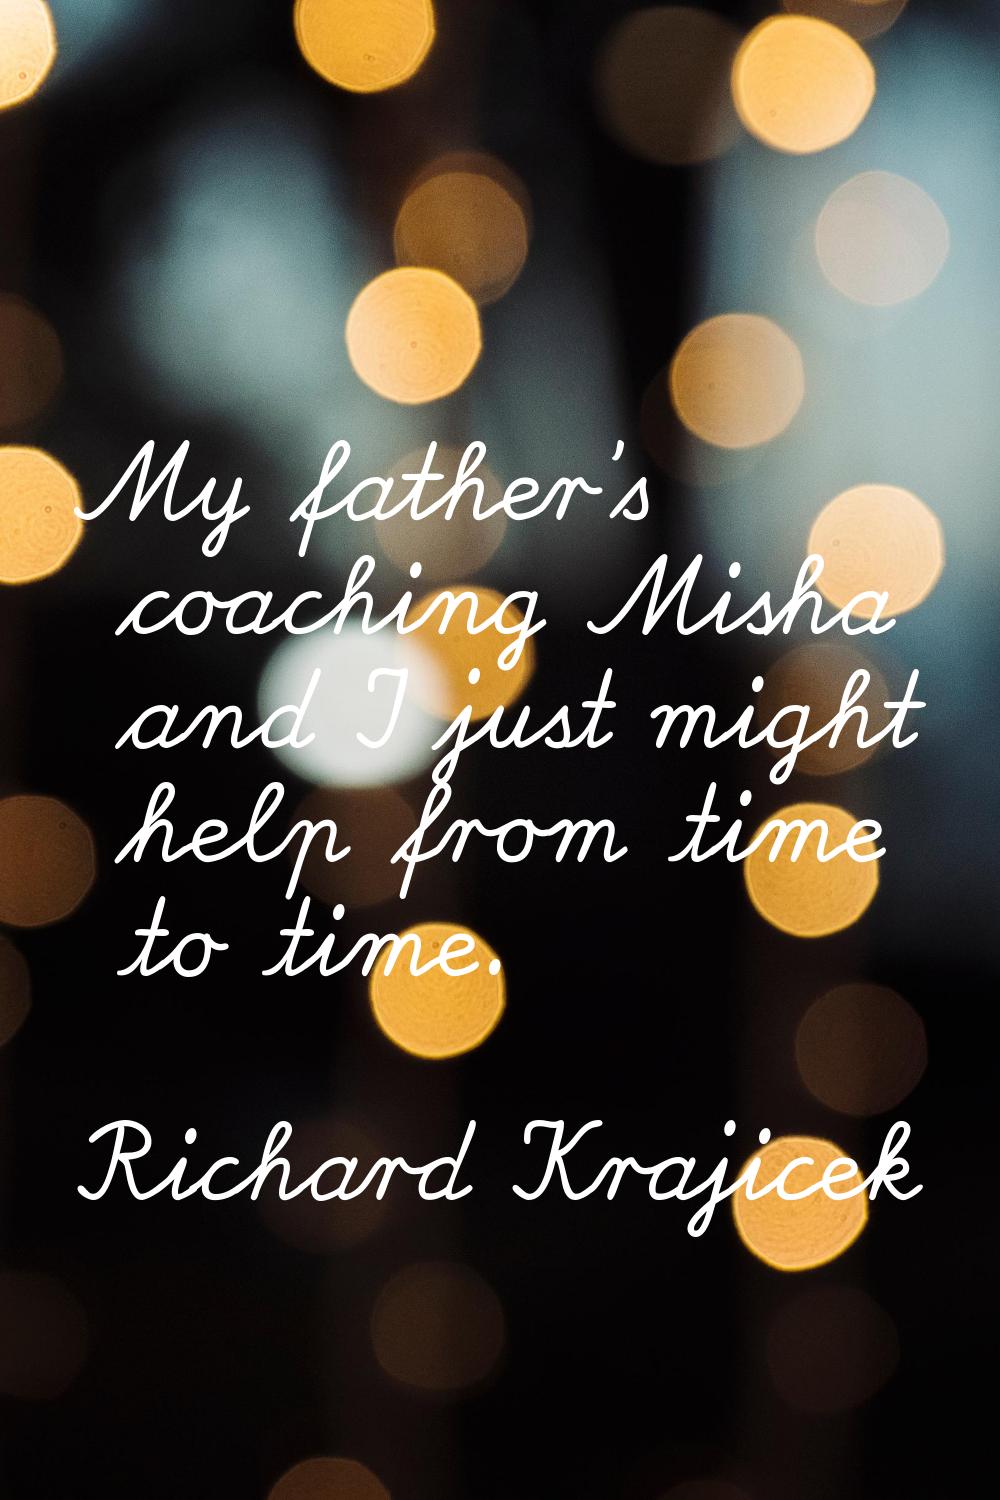 My father's coaching Misha and I just might help from time to time.